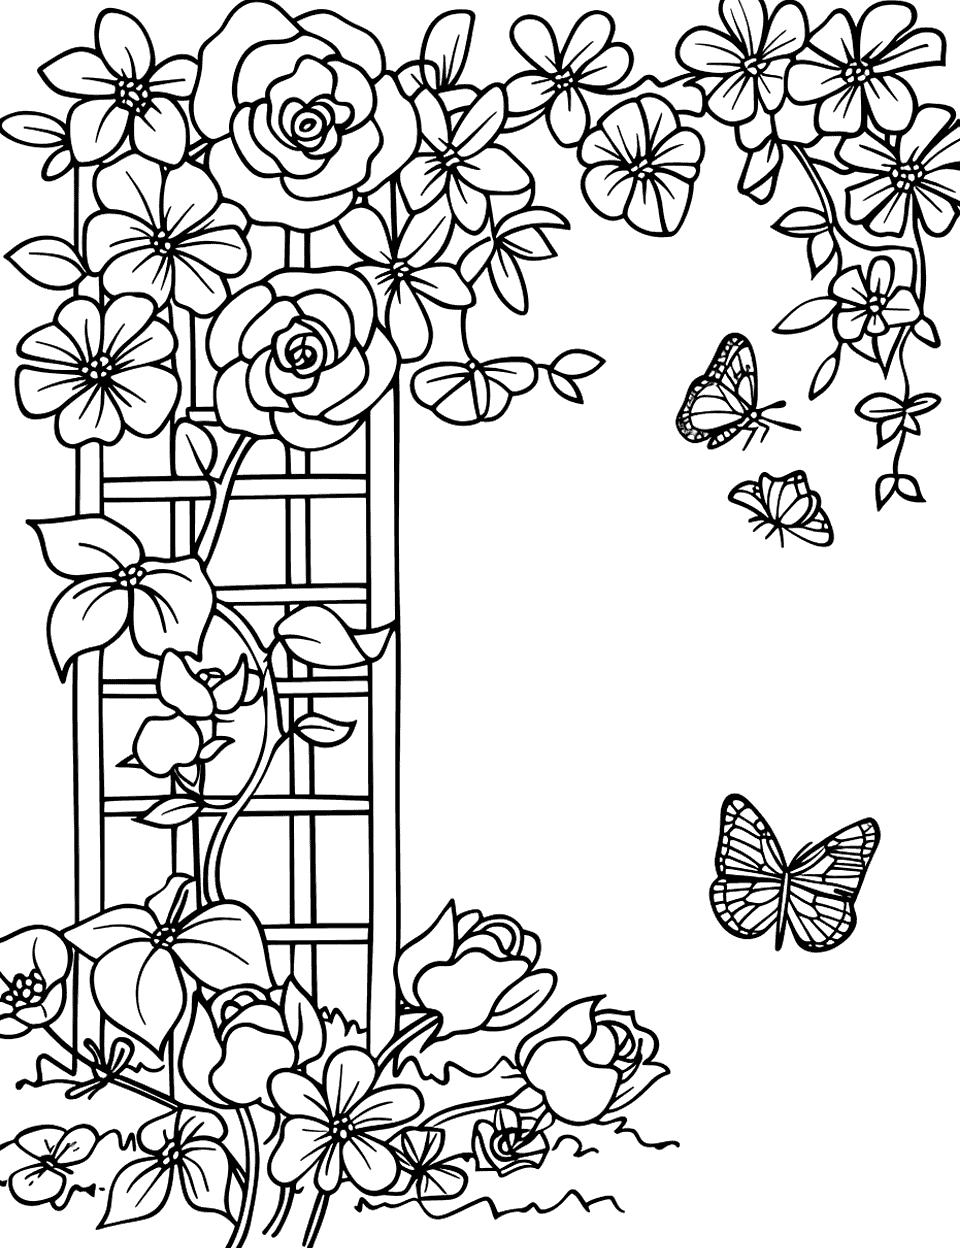 Roses Climbing a Trellis Garden Coloring Page - A trellis covered in blooming roses with butterflies hovering nearby.